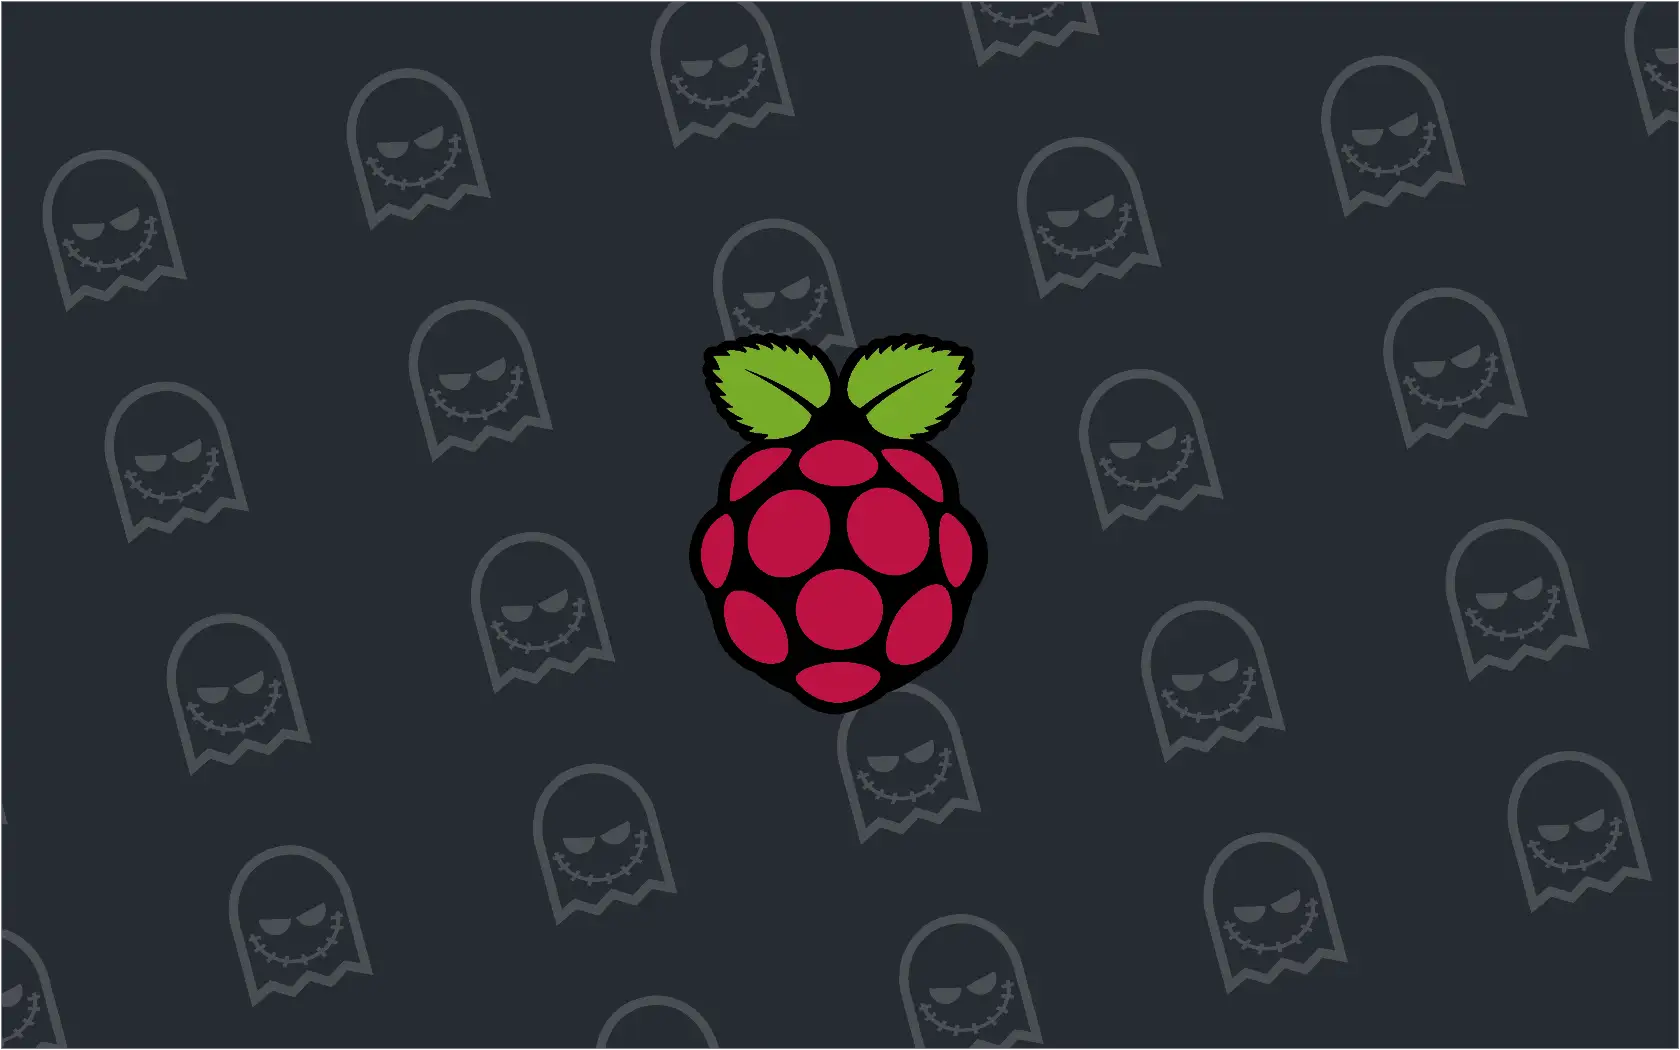 Install and run Ghost on a Raspberry Pi